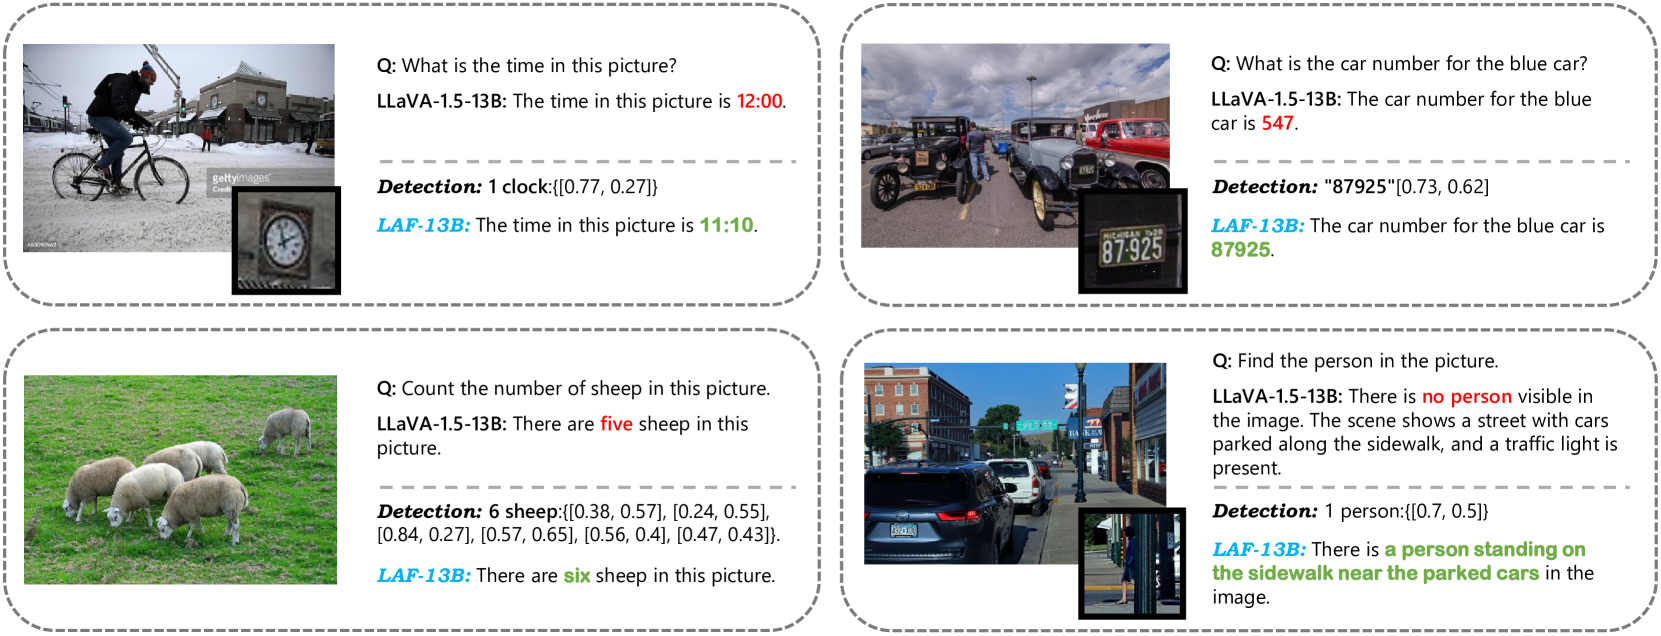 Enhancing Multimodal Large Language Models with Vision Detection Models: An Empirical Study